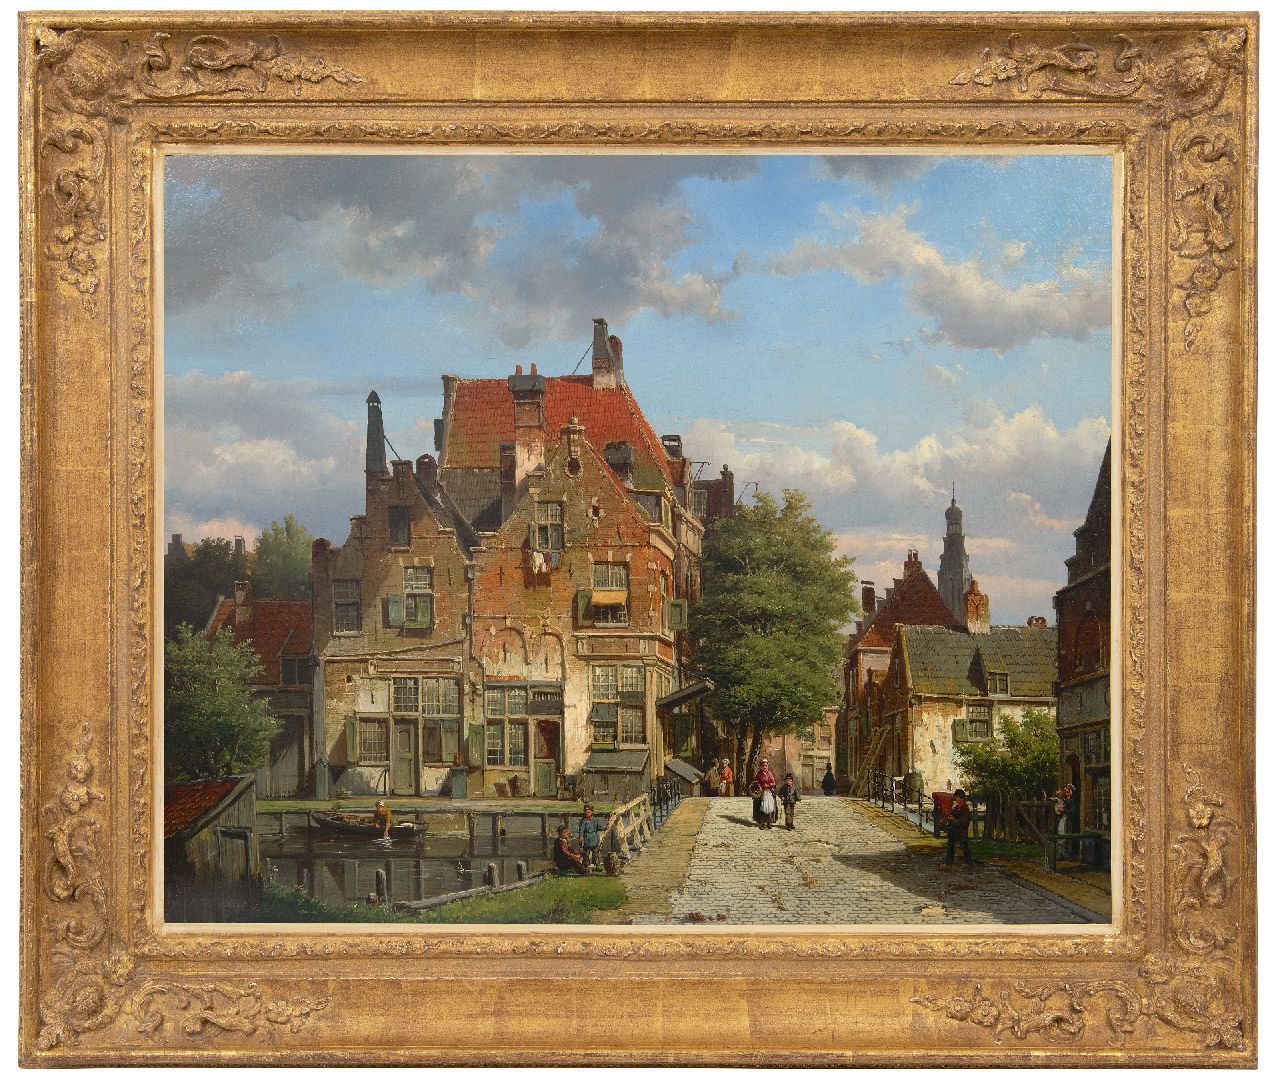 Koekkoek W.  | Willem Koekkoek | Paintings offered for sale | View of a Dutch street with a bridge over a canal, oil on canvas 67.4 x 82.3 cm, signed l.l. and dated '66